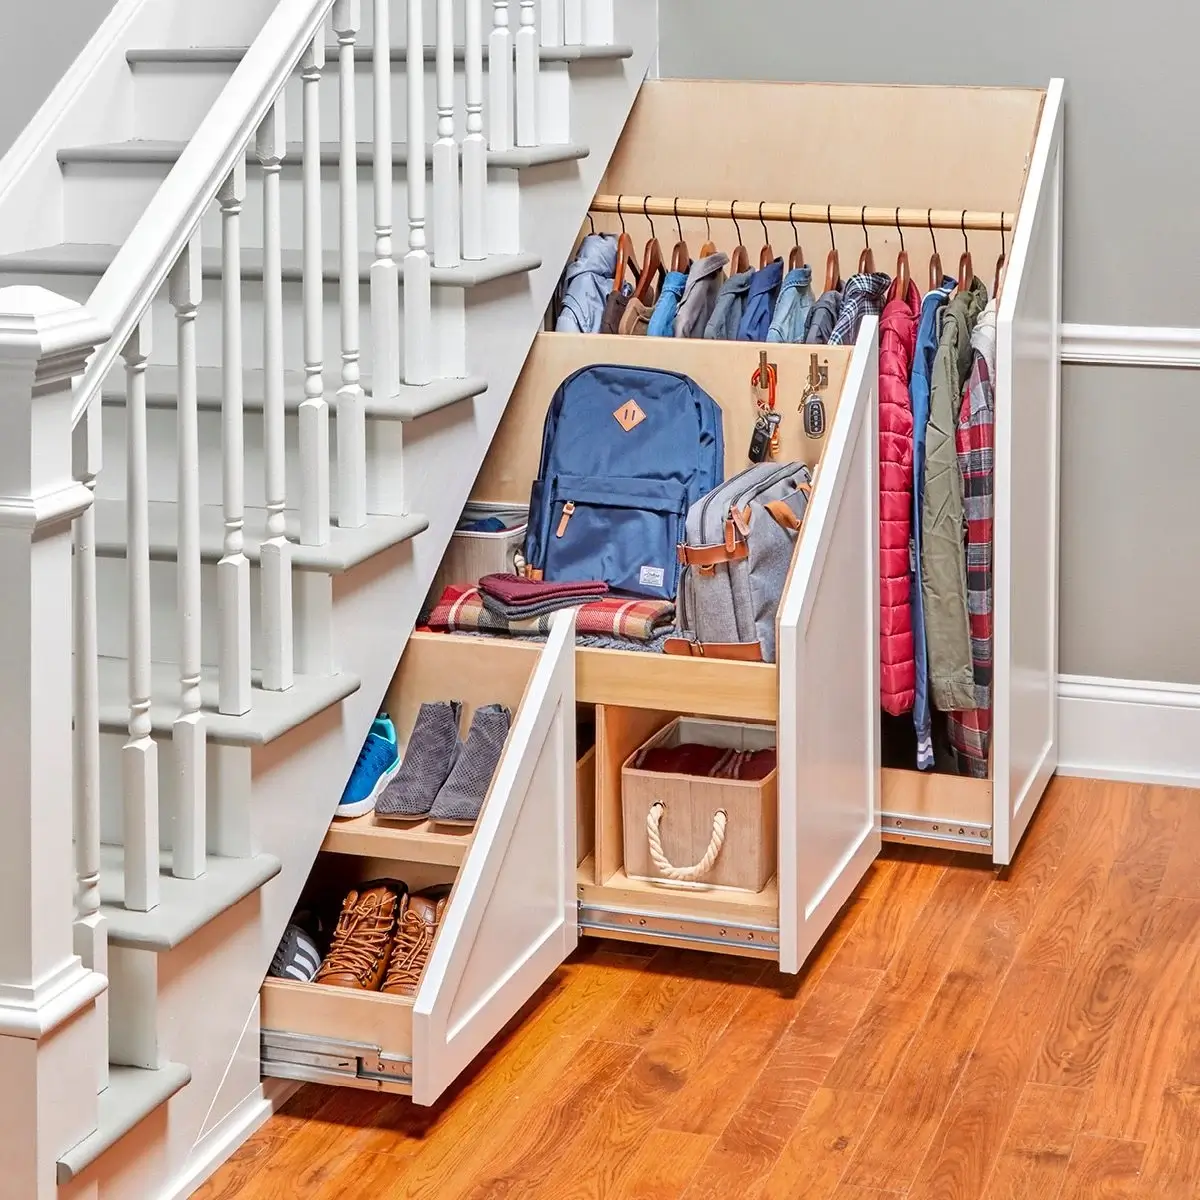 20 ideas under the stairs you will love - 141